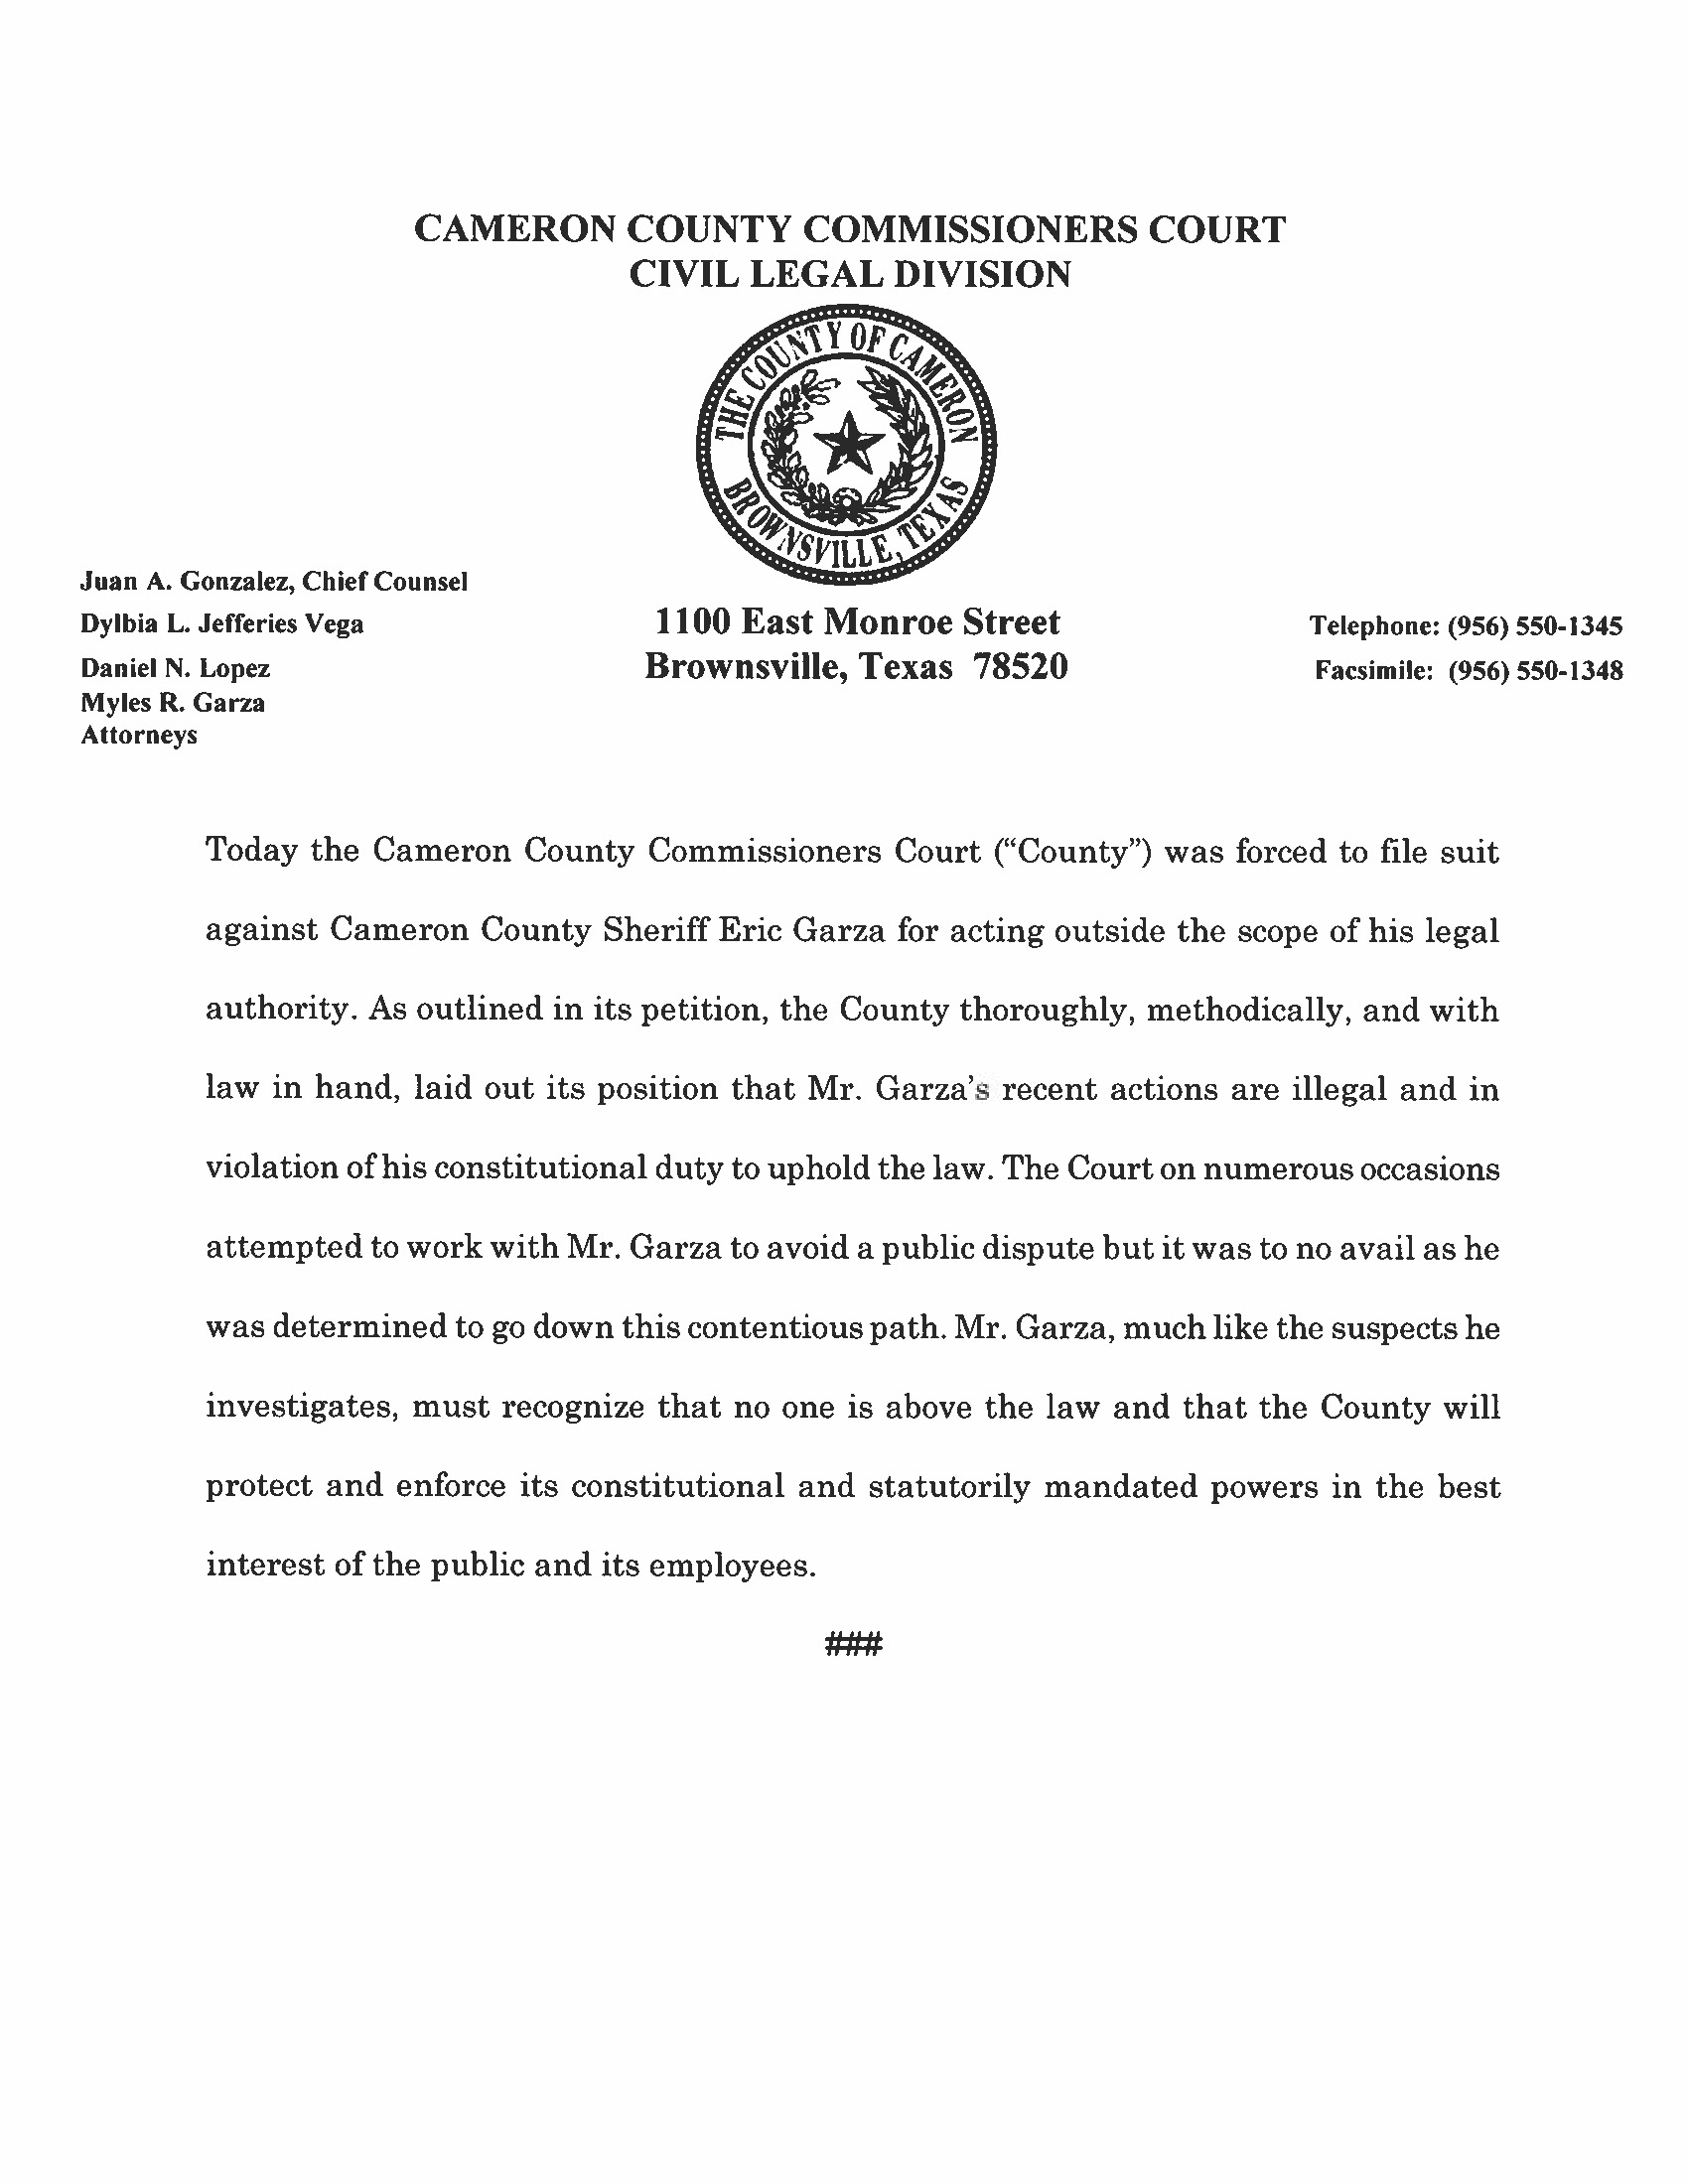 4.14.21 Cameron County Commissioners Court Civil Legal Division Statement